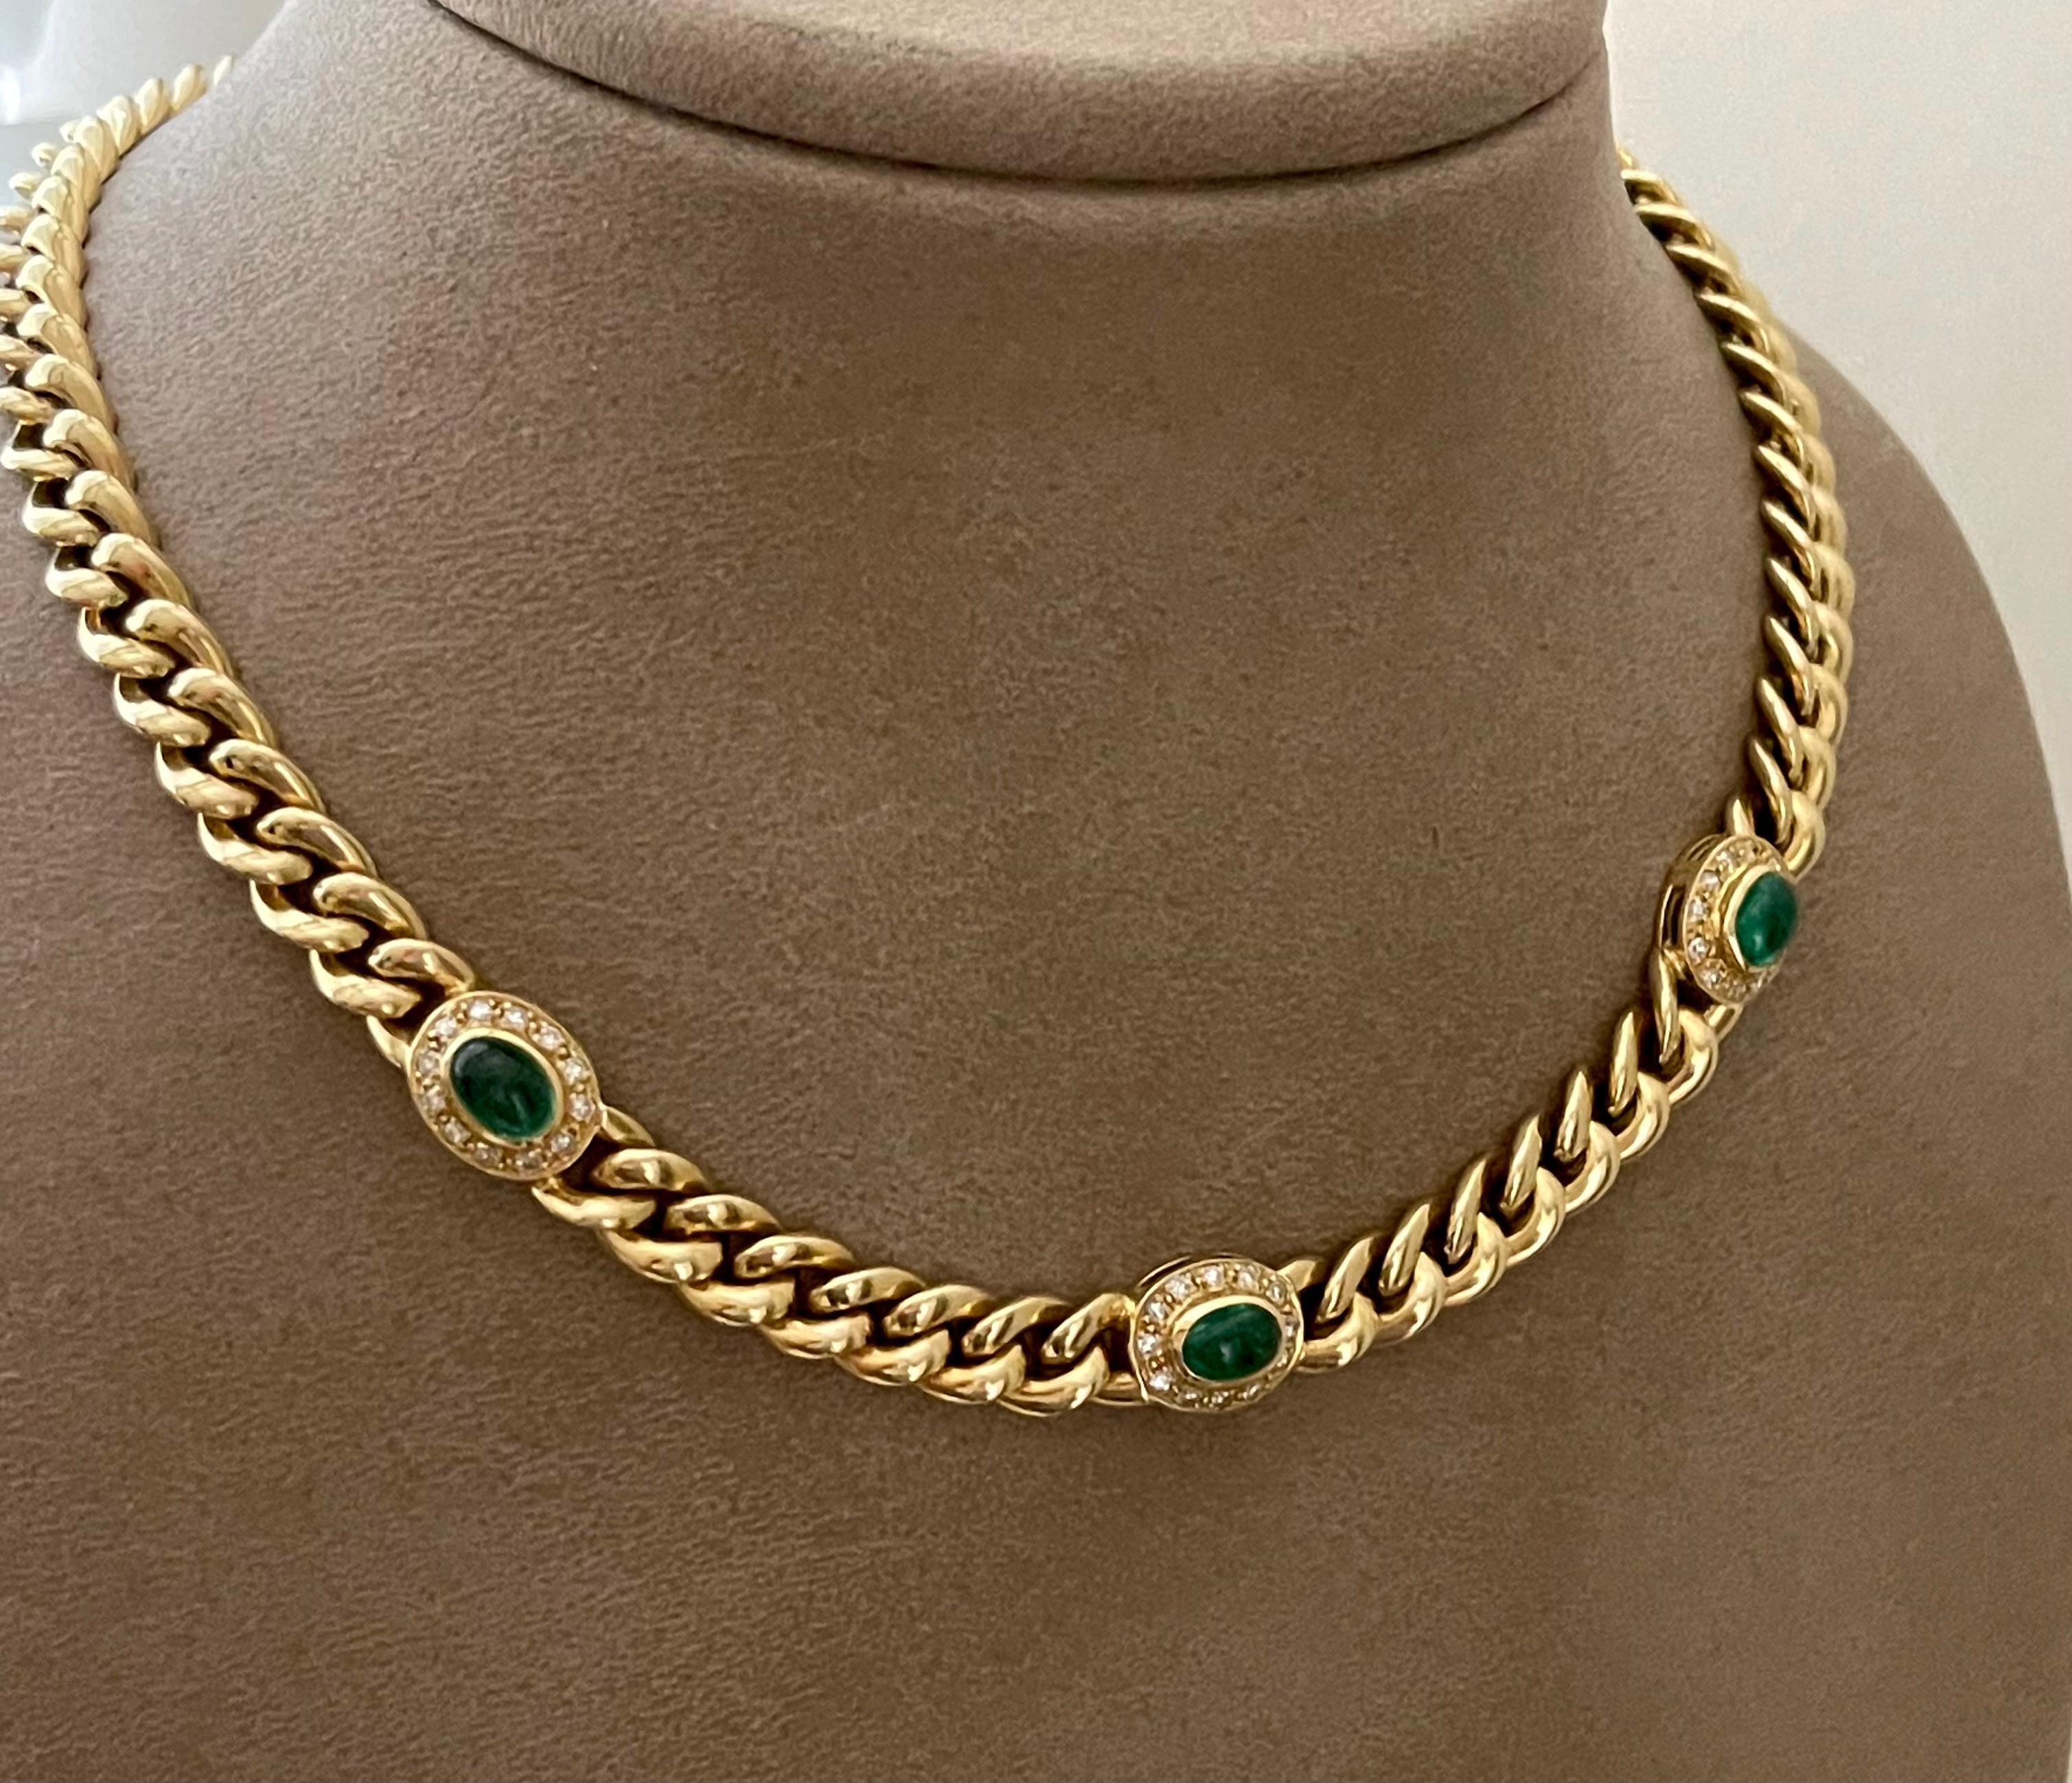 Contemporary 18 Karat Gold Twisted Curb Chain Necklace Emerald Cabochons Diamonds by Bucherer